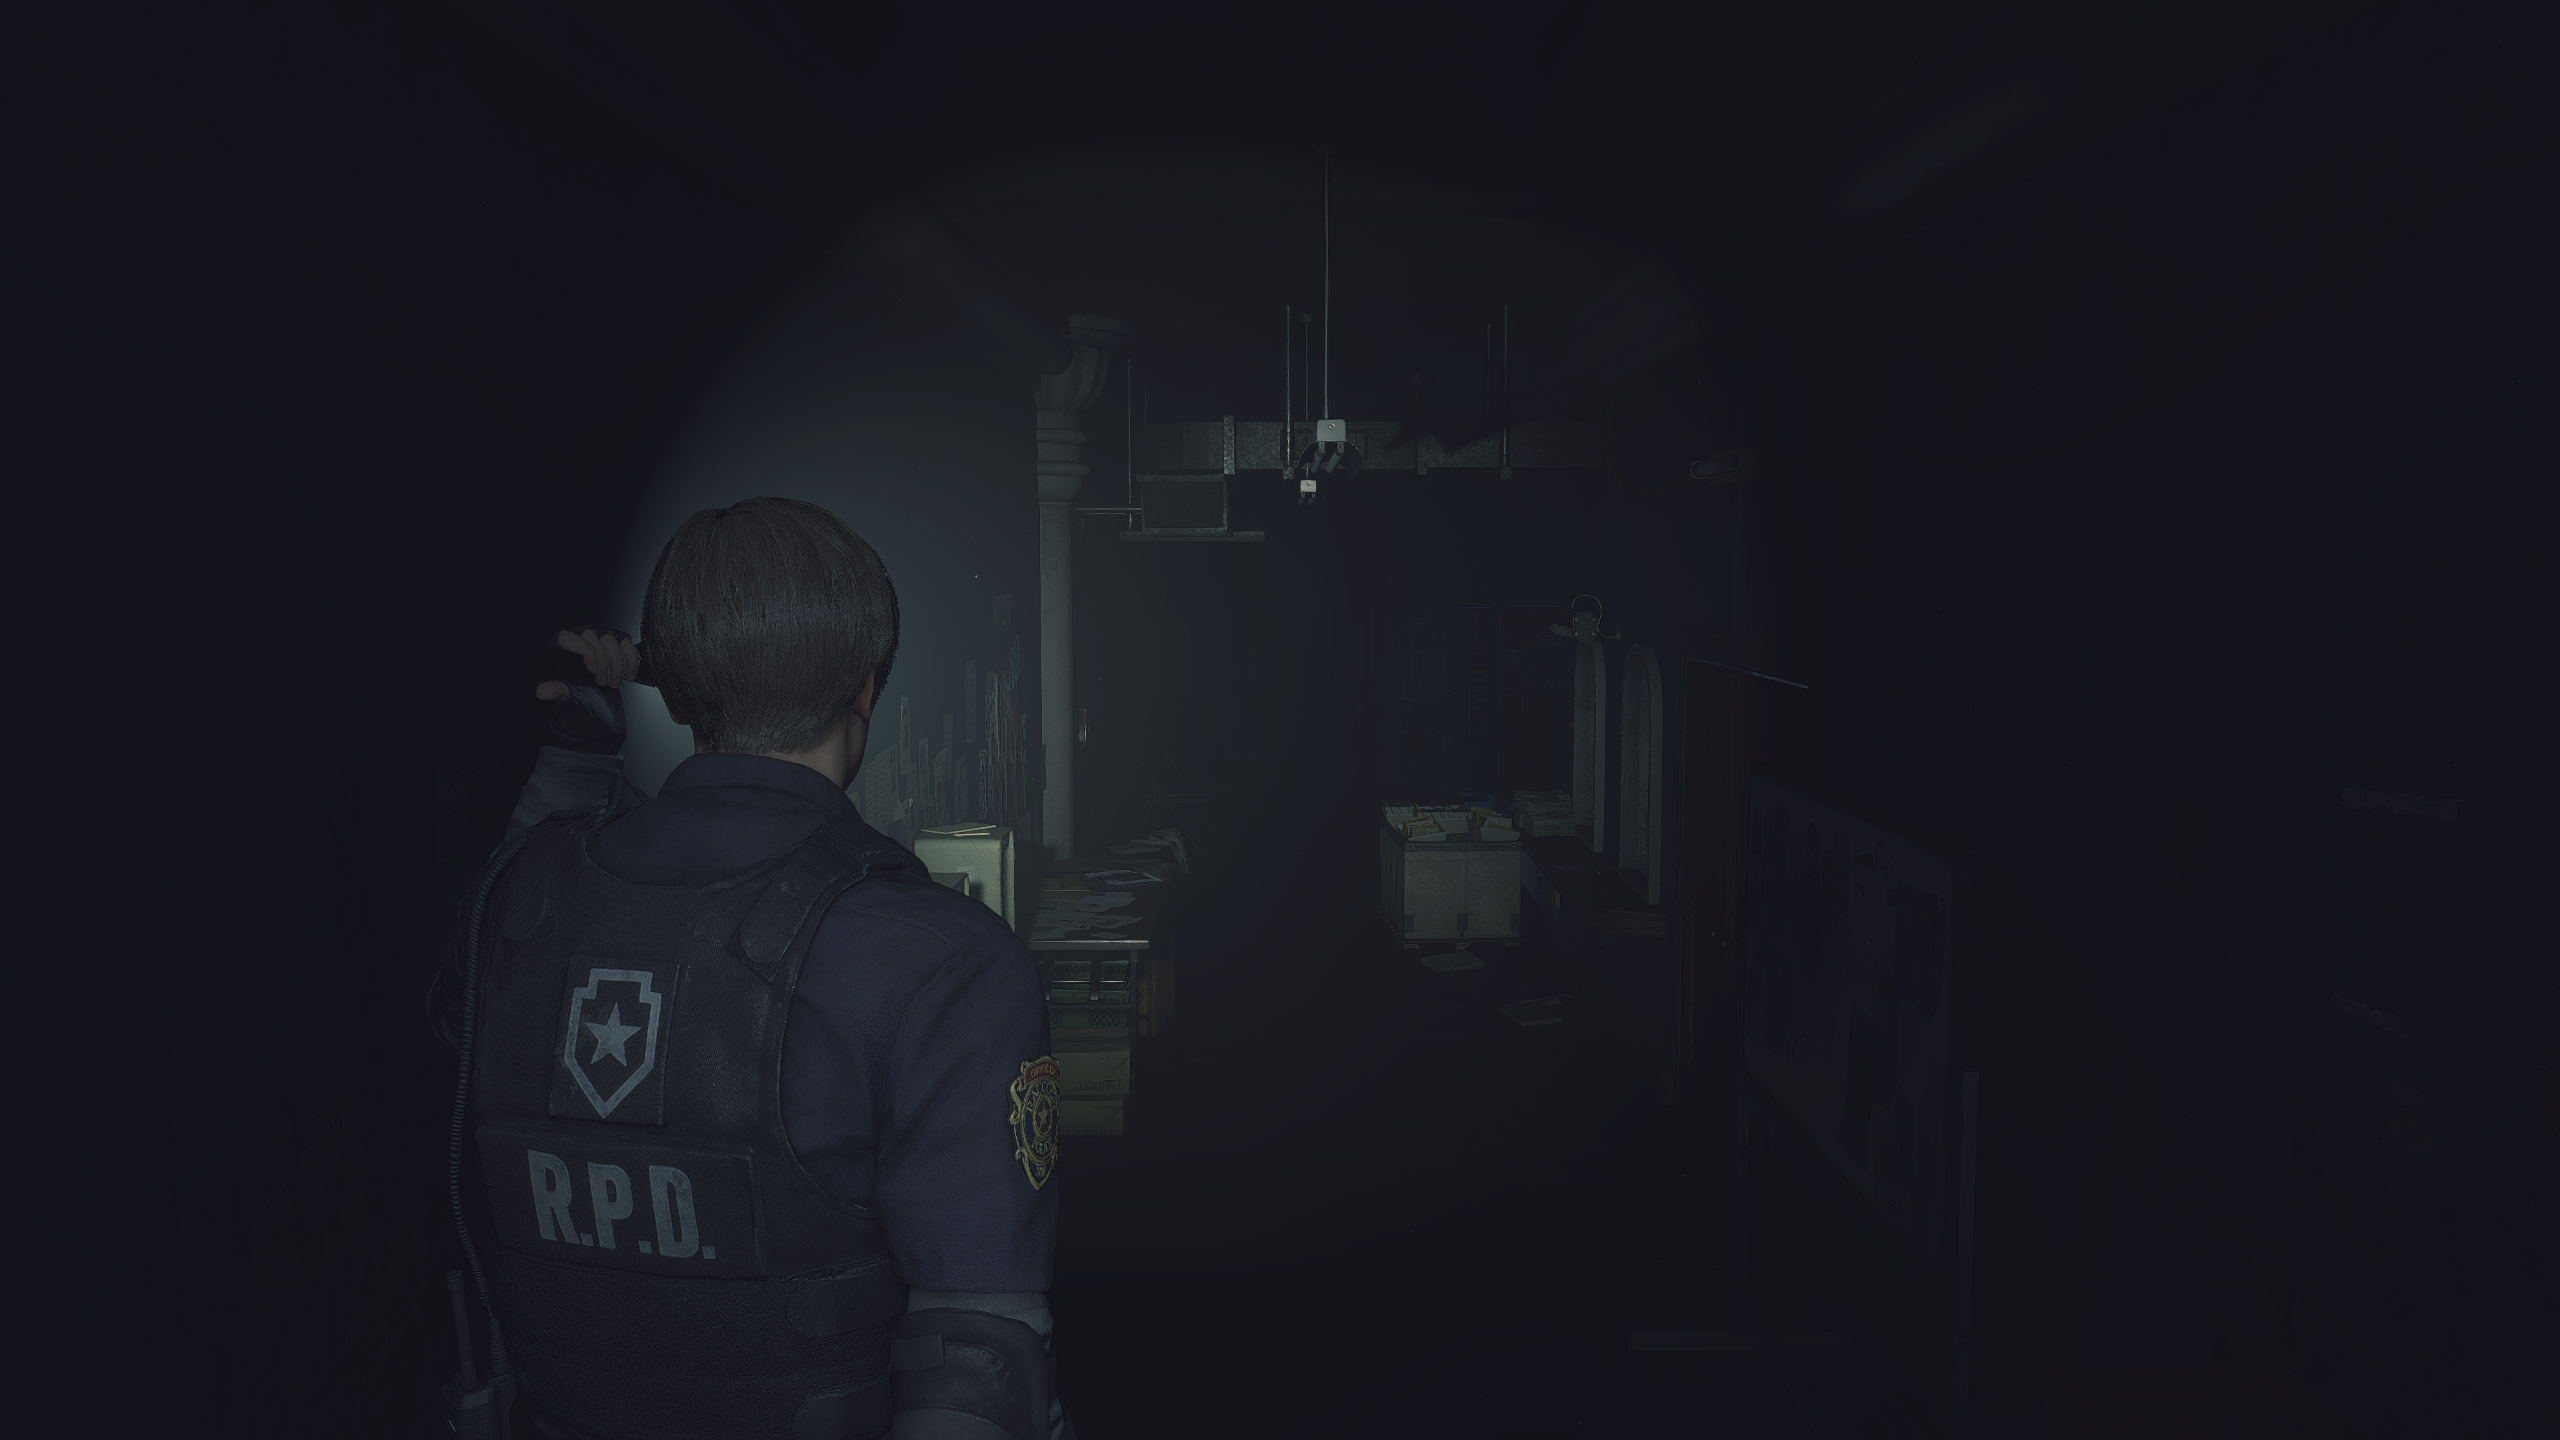 Low vs Ultra on Resident Evil 2 Remake with Radeon RX 570 4GB